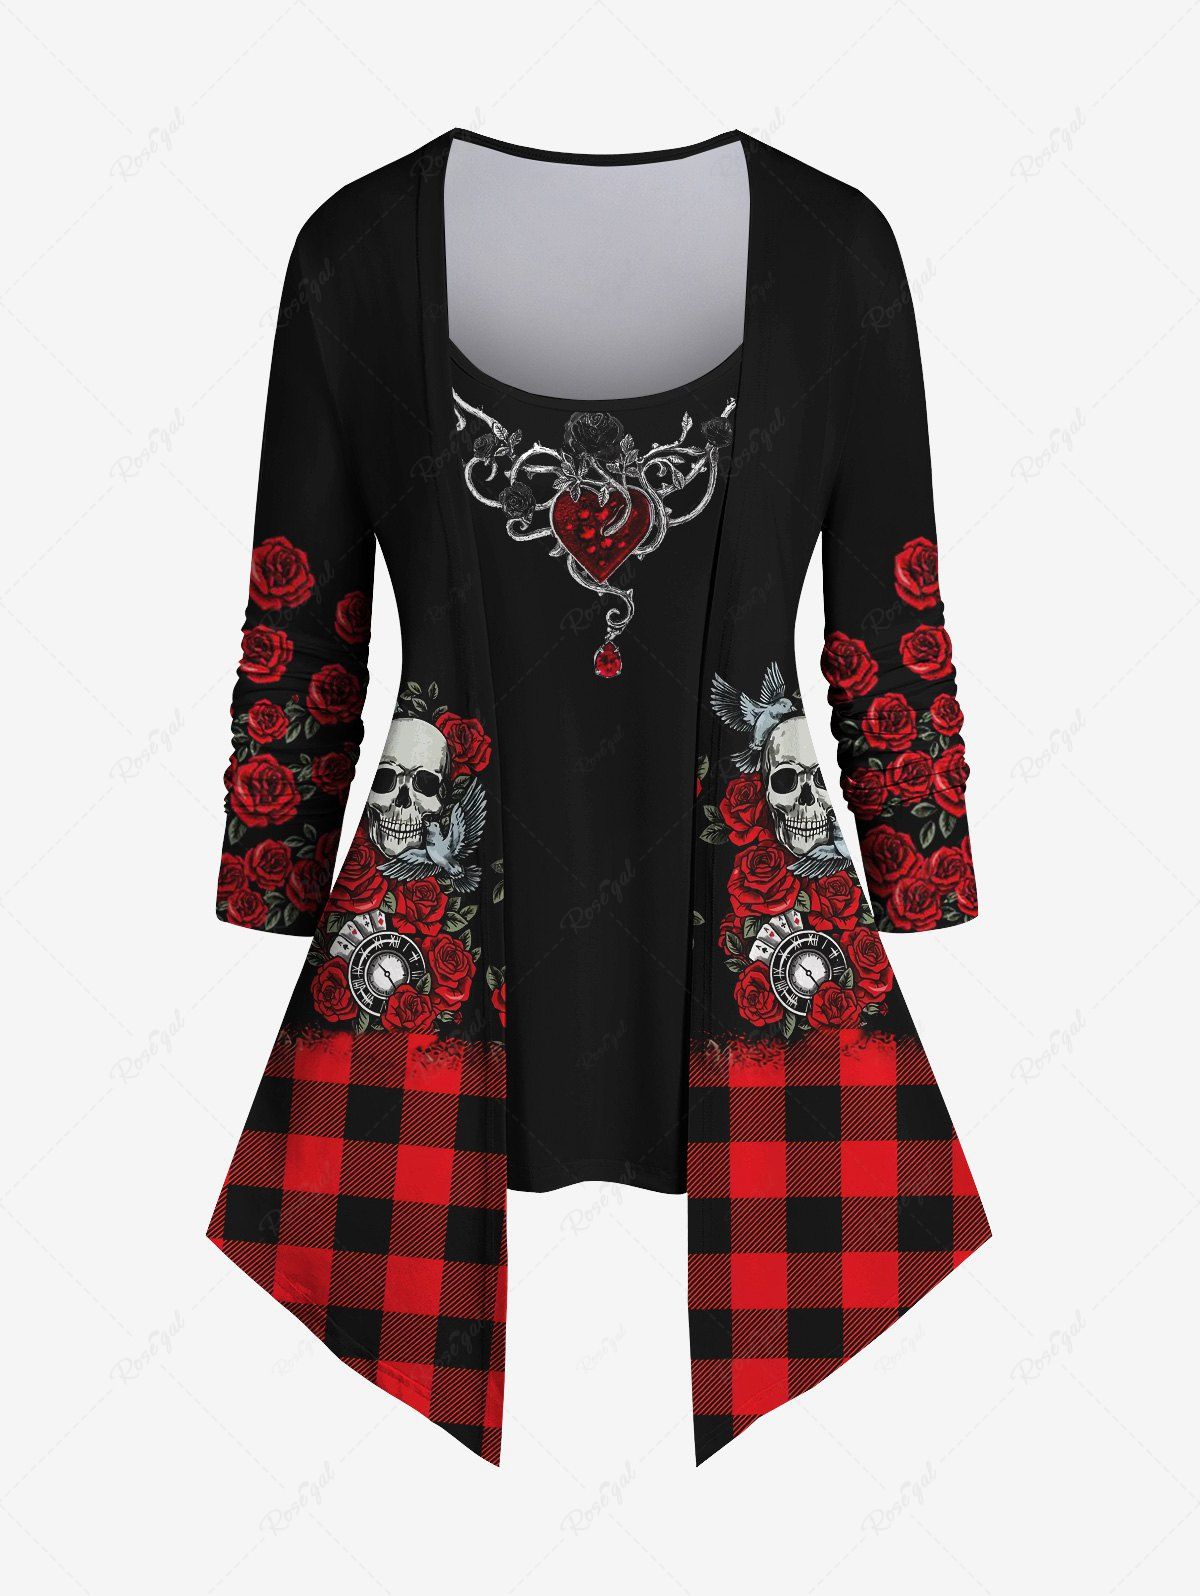 Sale Plus Size 3D Skull Rose Floral Heart Branch Plaid Print Halloween Patchwork 2 in 1 T-shirt  